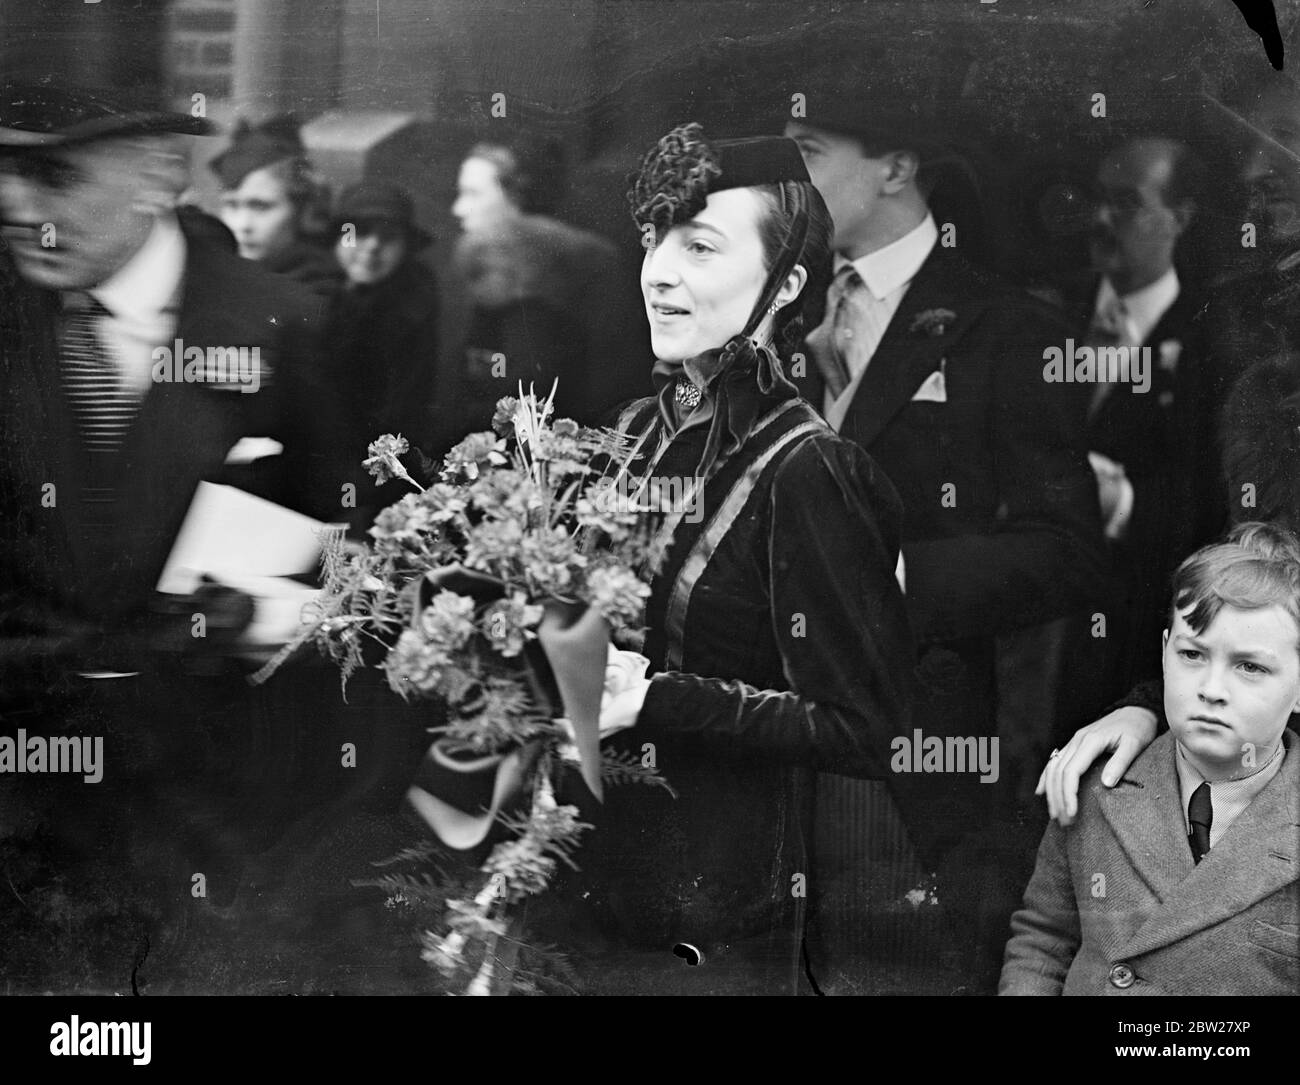 Pillbox hat fashion at London turf wedding. Mrs Barbara Robb, chief bridal attendant, wearing a novel 'Pill Box' hat fashion which ties beneath the chin, after the wedding at St Mary's Church, Cadogan Street, London, of Miss Constance Dagnell and Major George Anne, managing director of Tote Investors, Ltd. 22 Janary 1938 Stock Photo